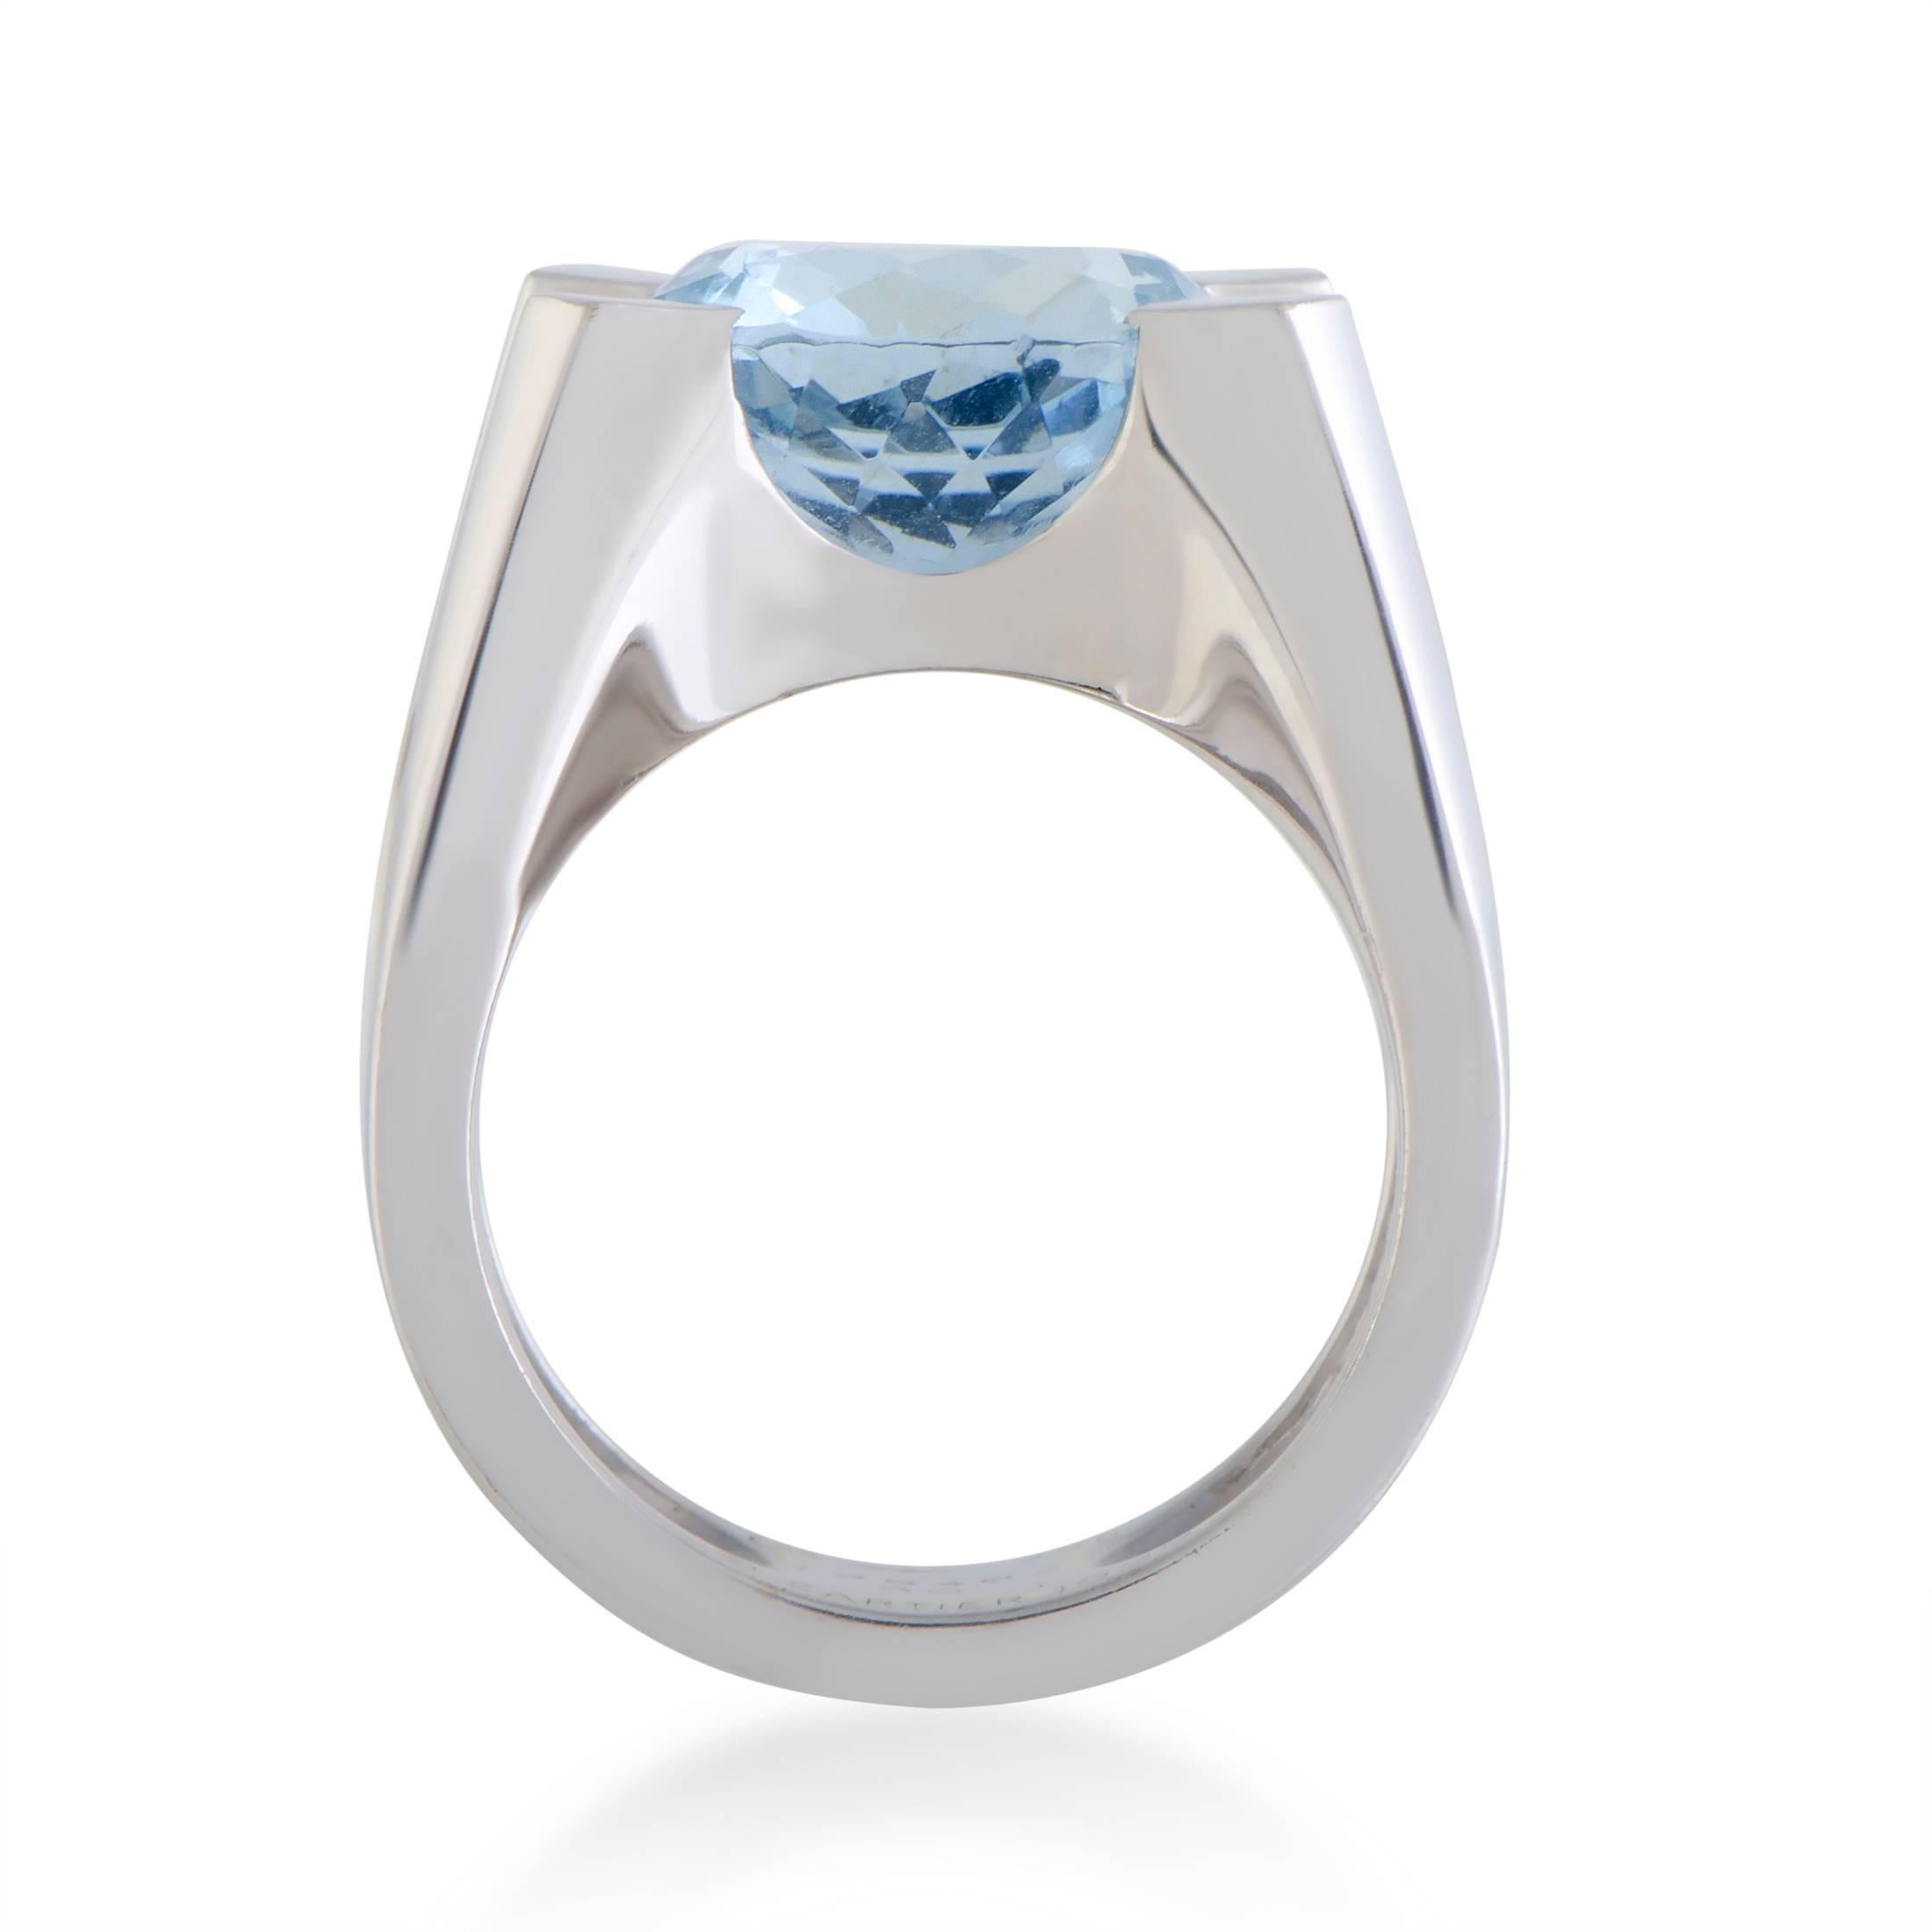 This breathtaking ring is beautifully designed by Cartier in shimmering 18K white gold. The elegant ring displays an exquisitely charming appeal with its extravagant embellishment of a captivating blue aquamarine stone that makes the piece